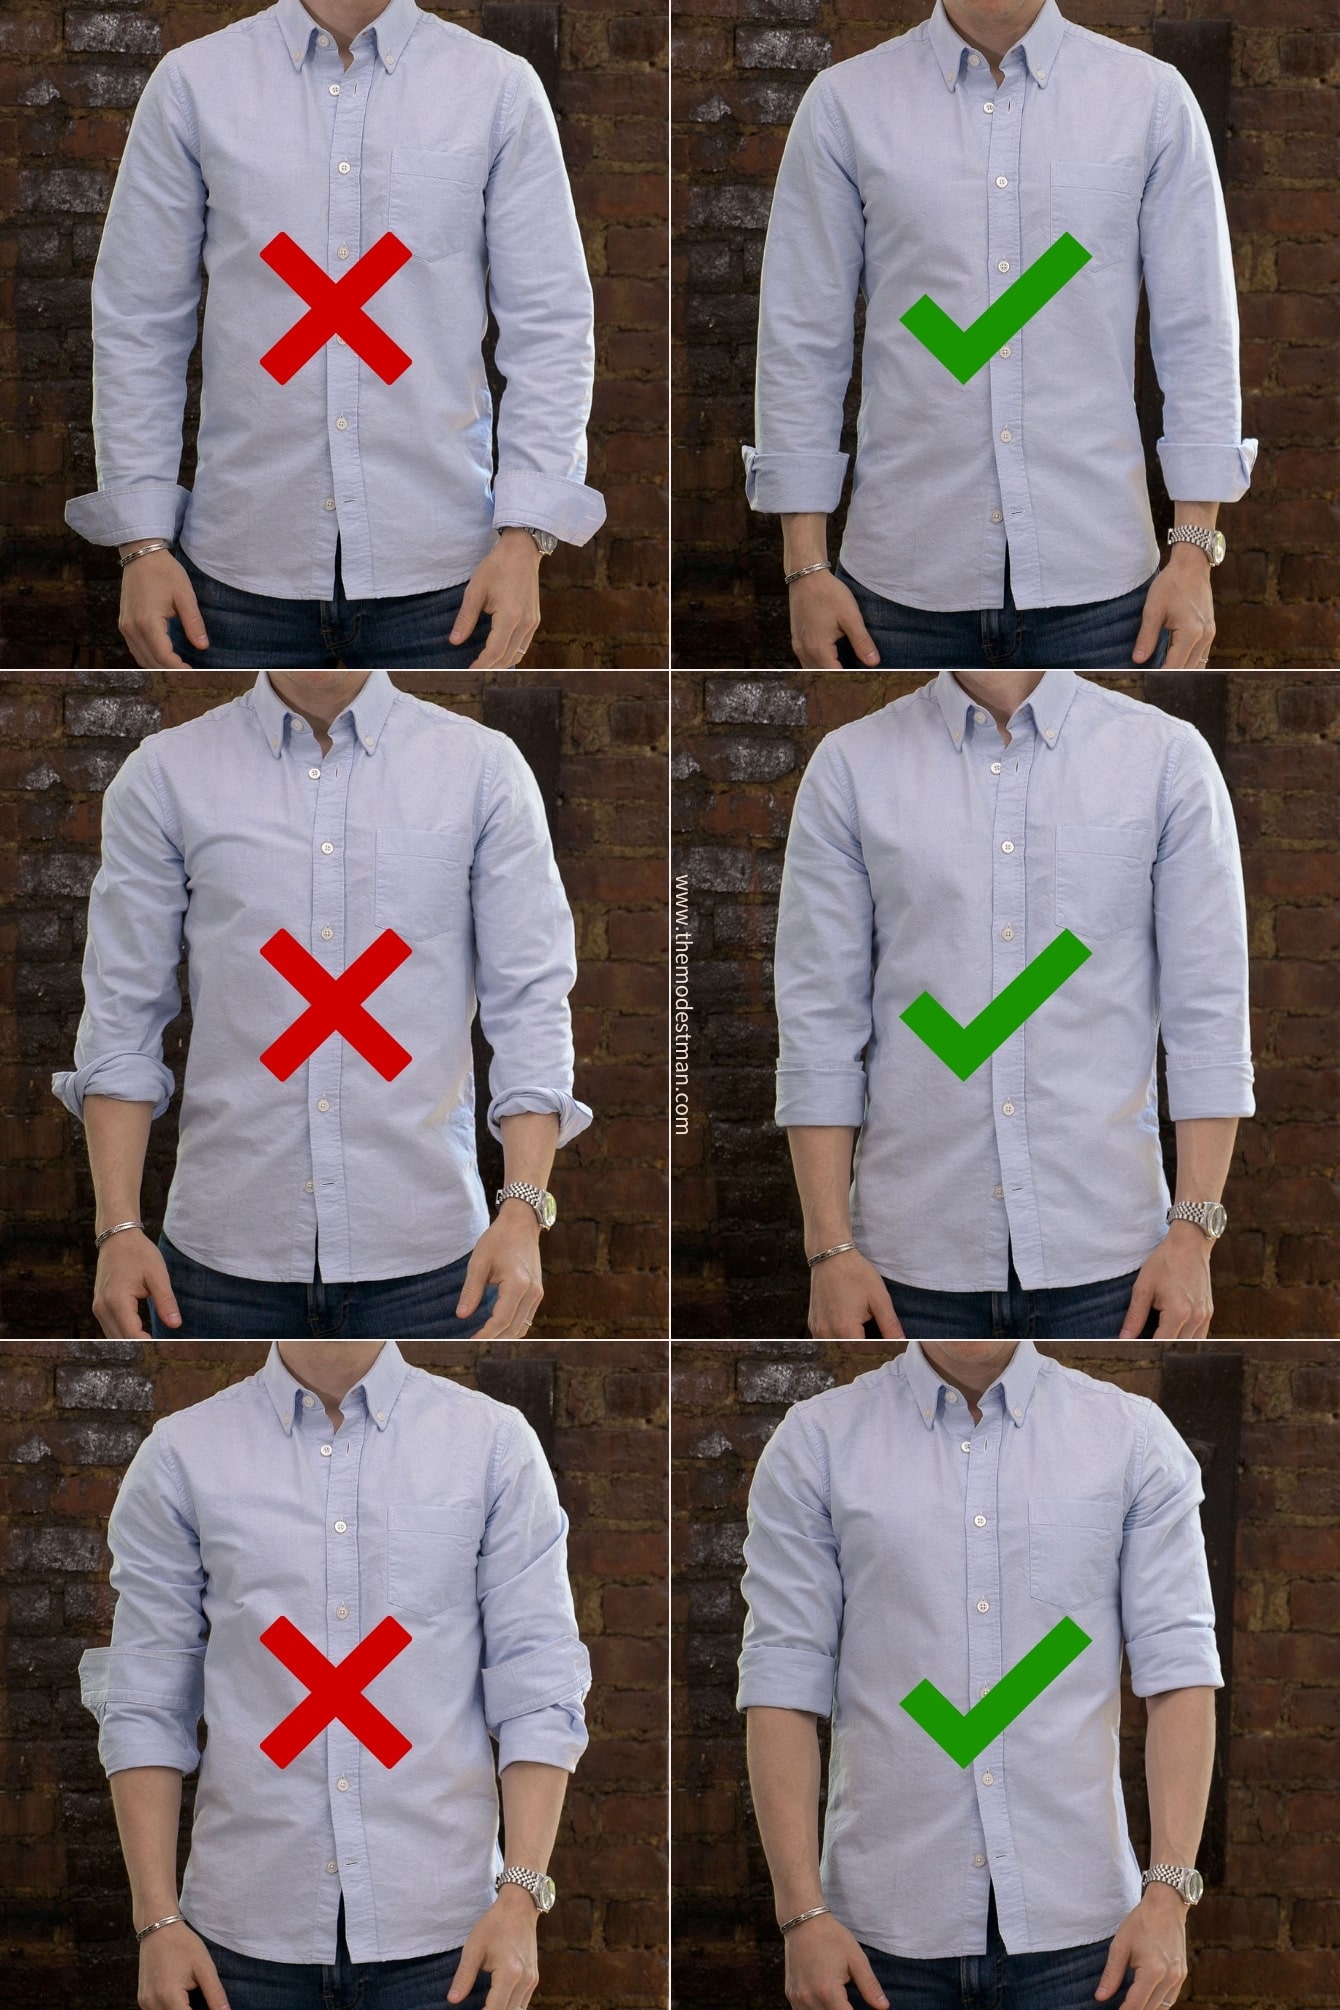 How to Roll up Dress Shirt Sleeves [step-by-step instructions